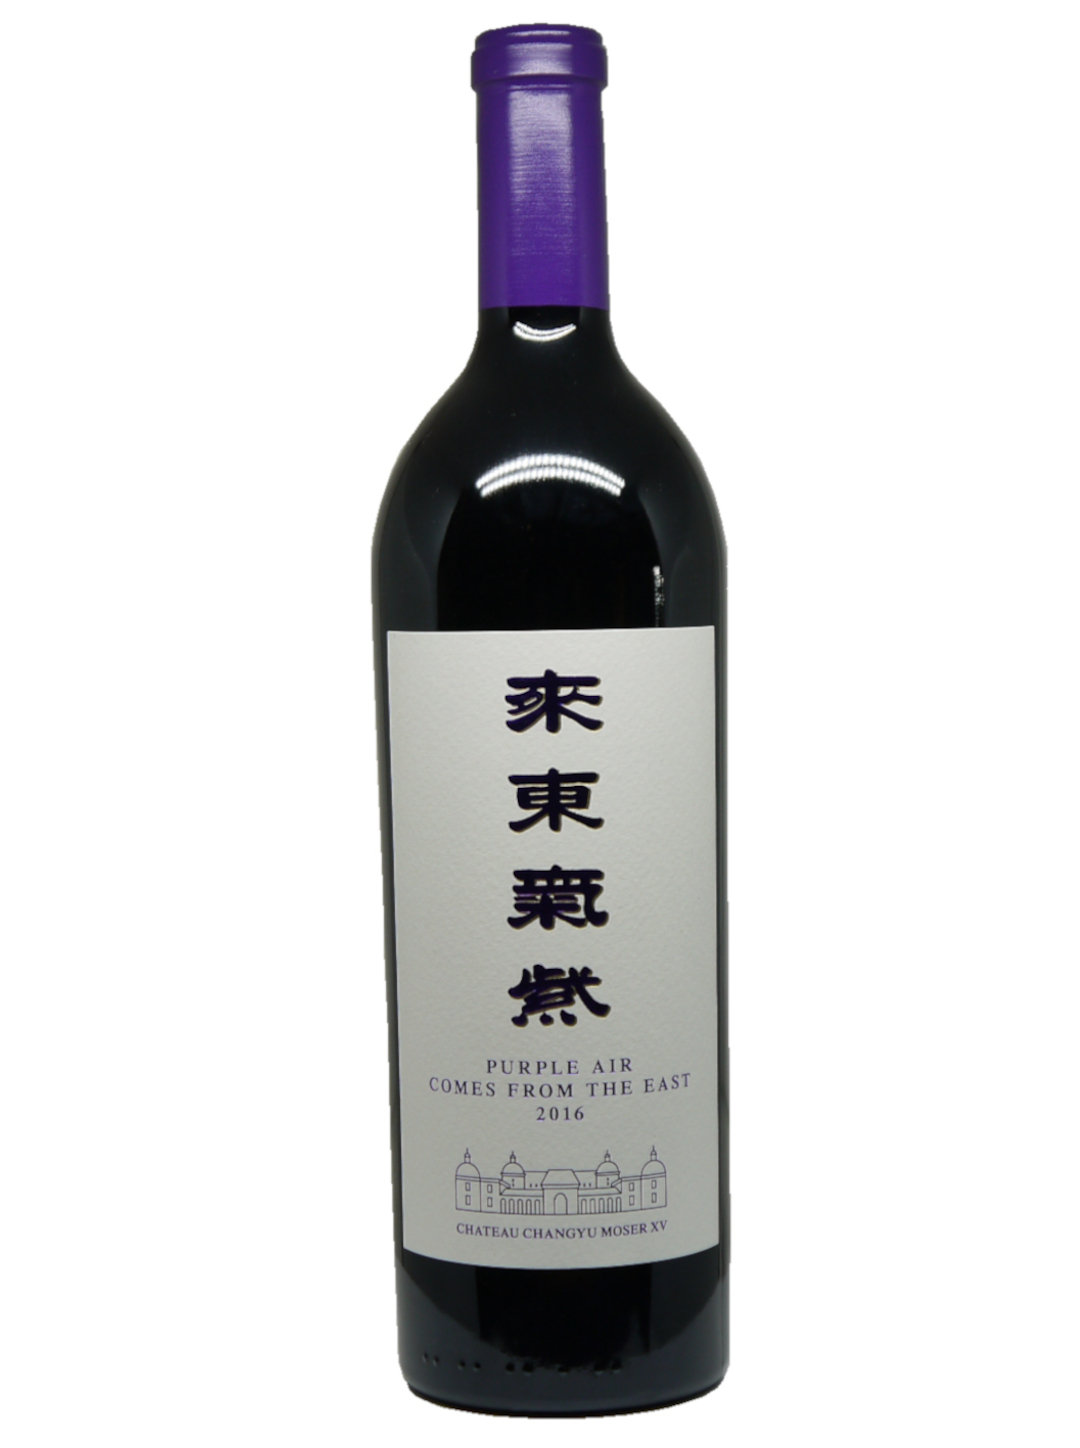 Château Changyu Moser XV Cabernet Sauvignon Purple Air Comes From The East